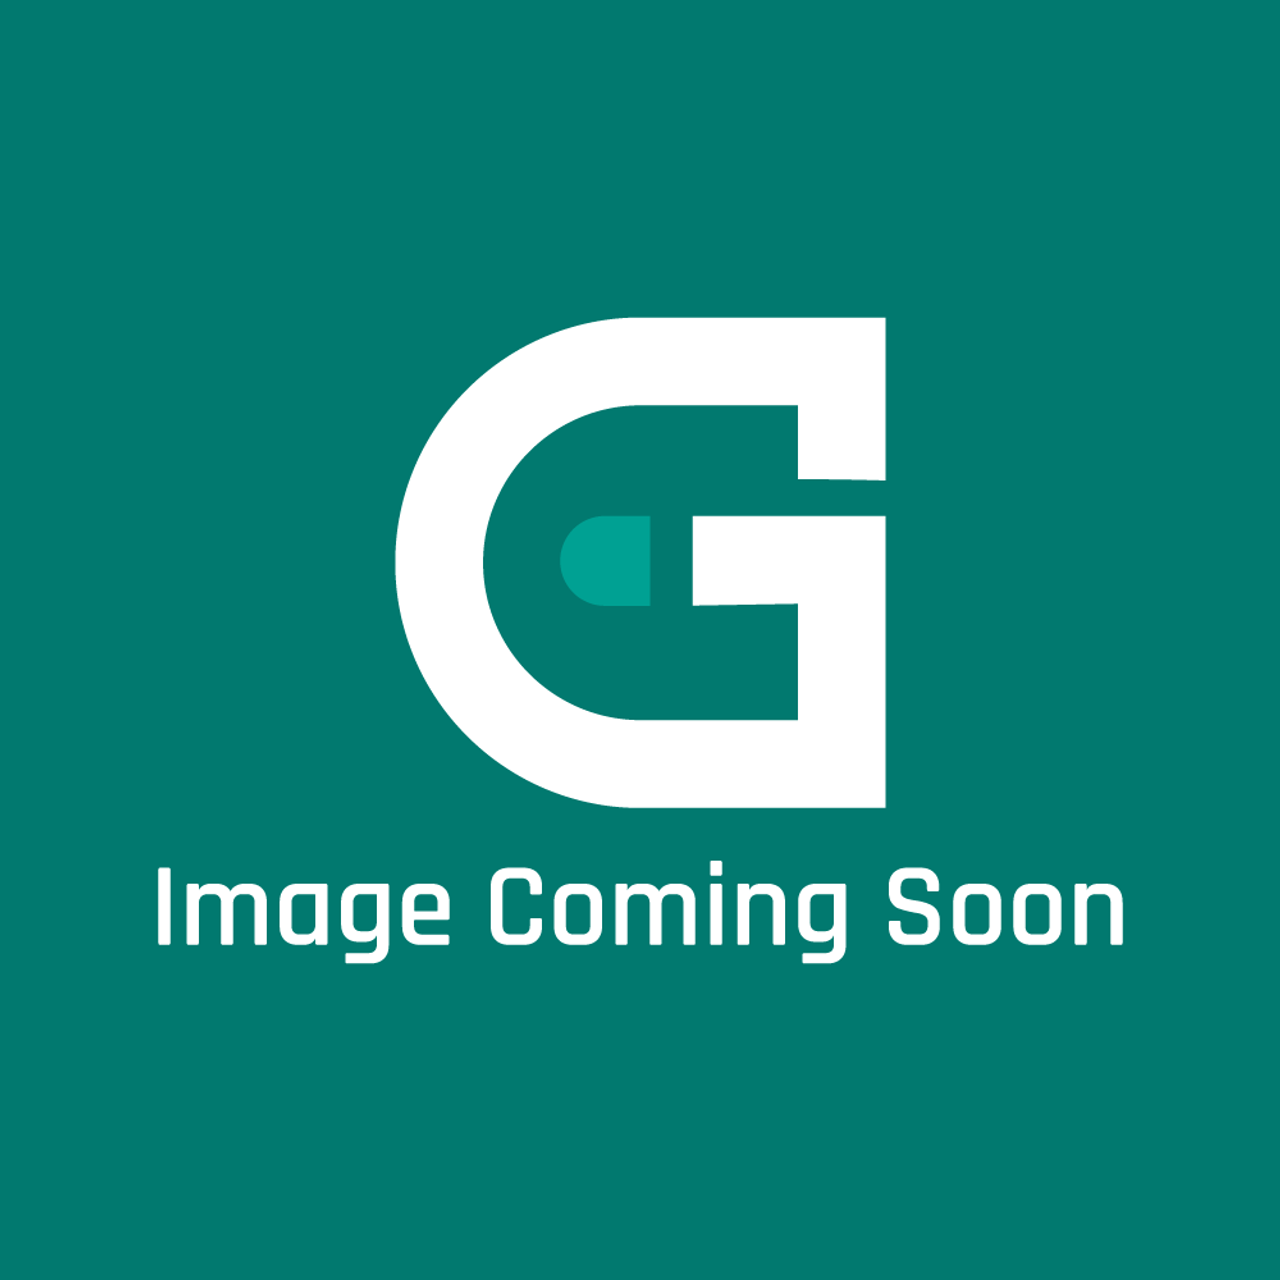 Frigidaire - Electrolux 5304482268 Chimney - Image Coming Soon!